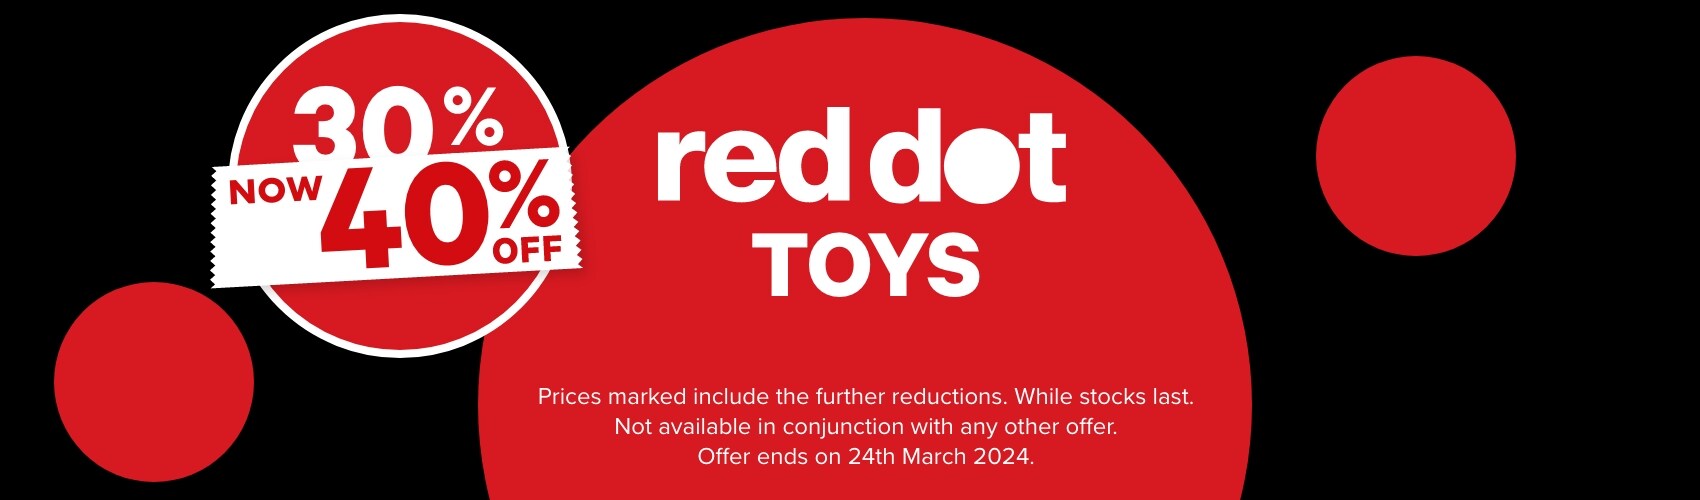 40% OFF Red Dot Toys